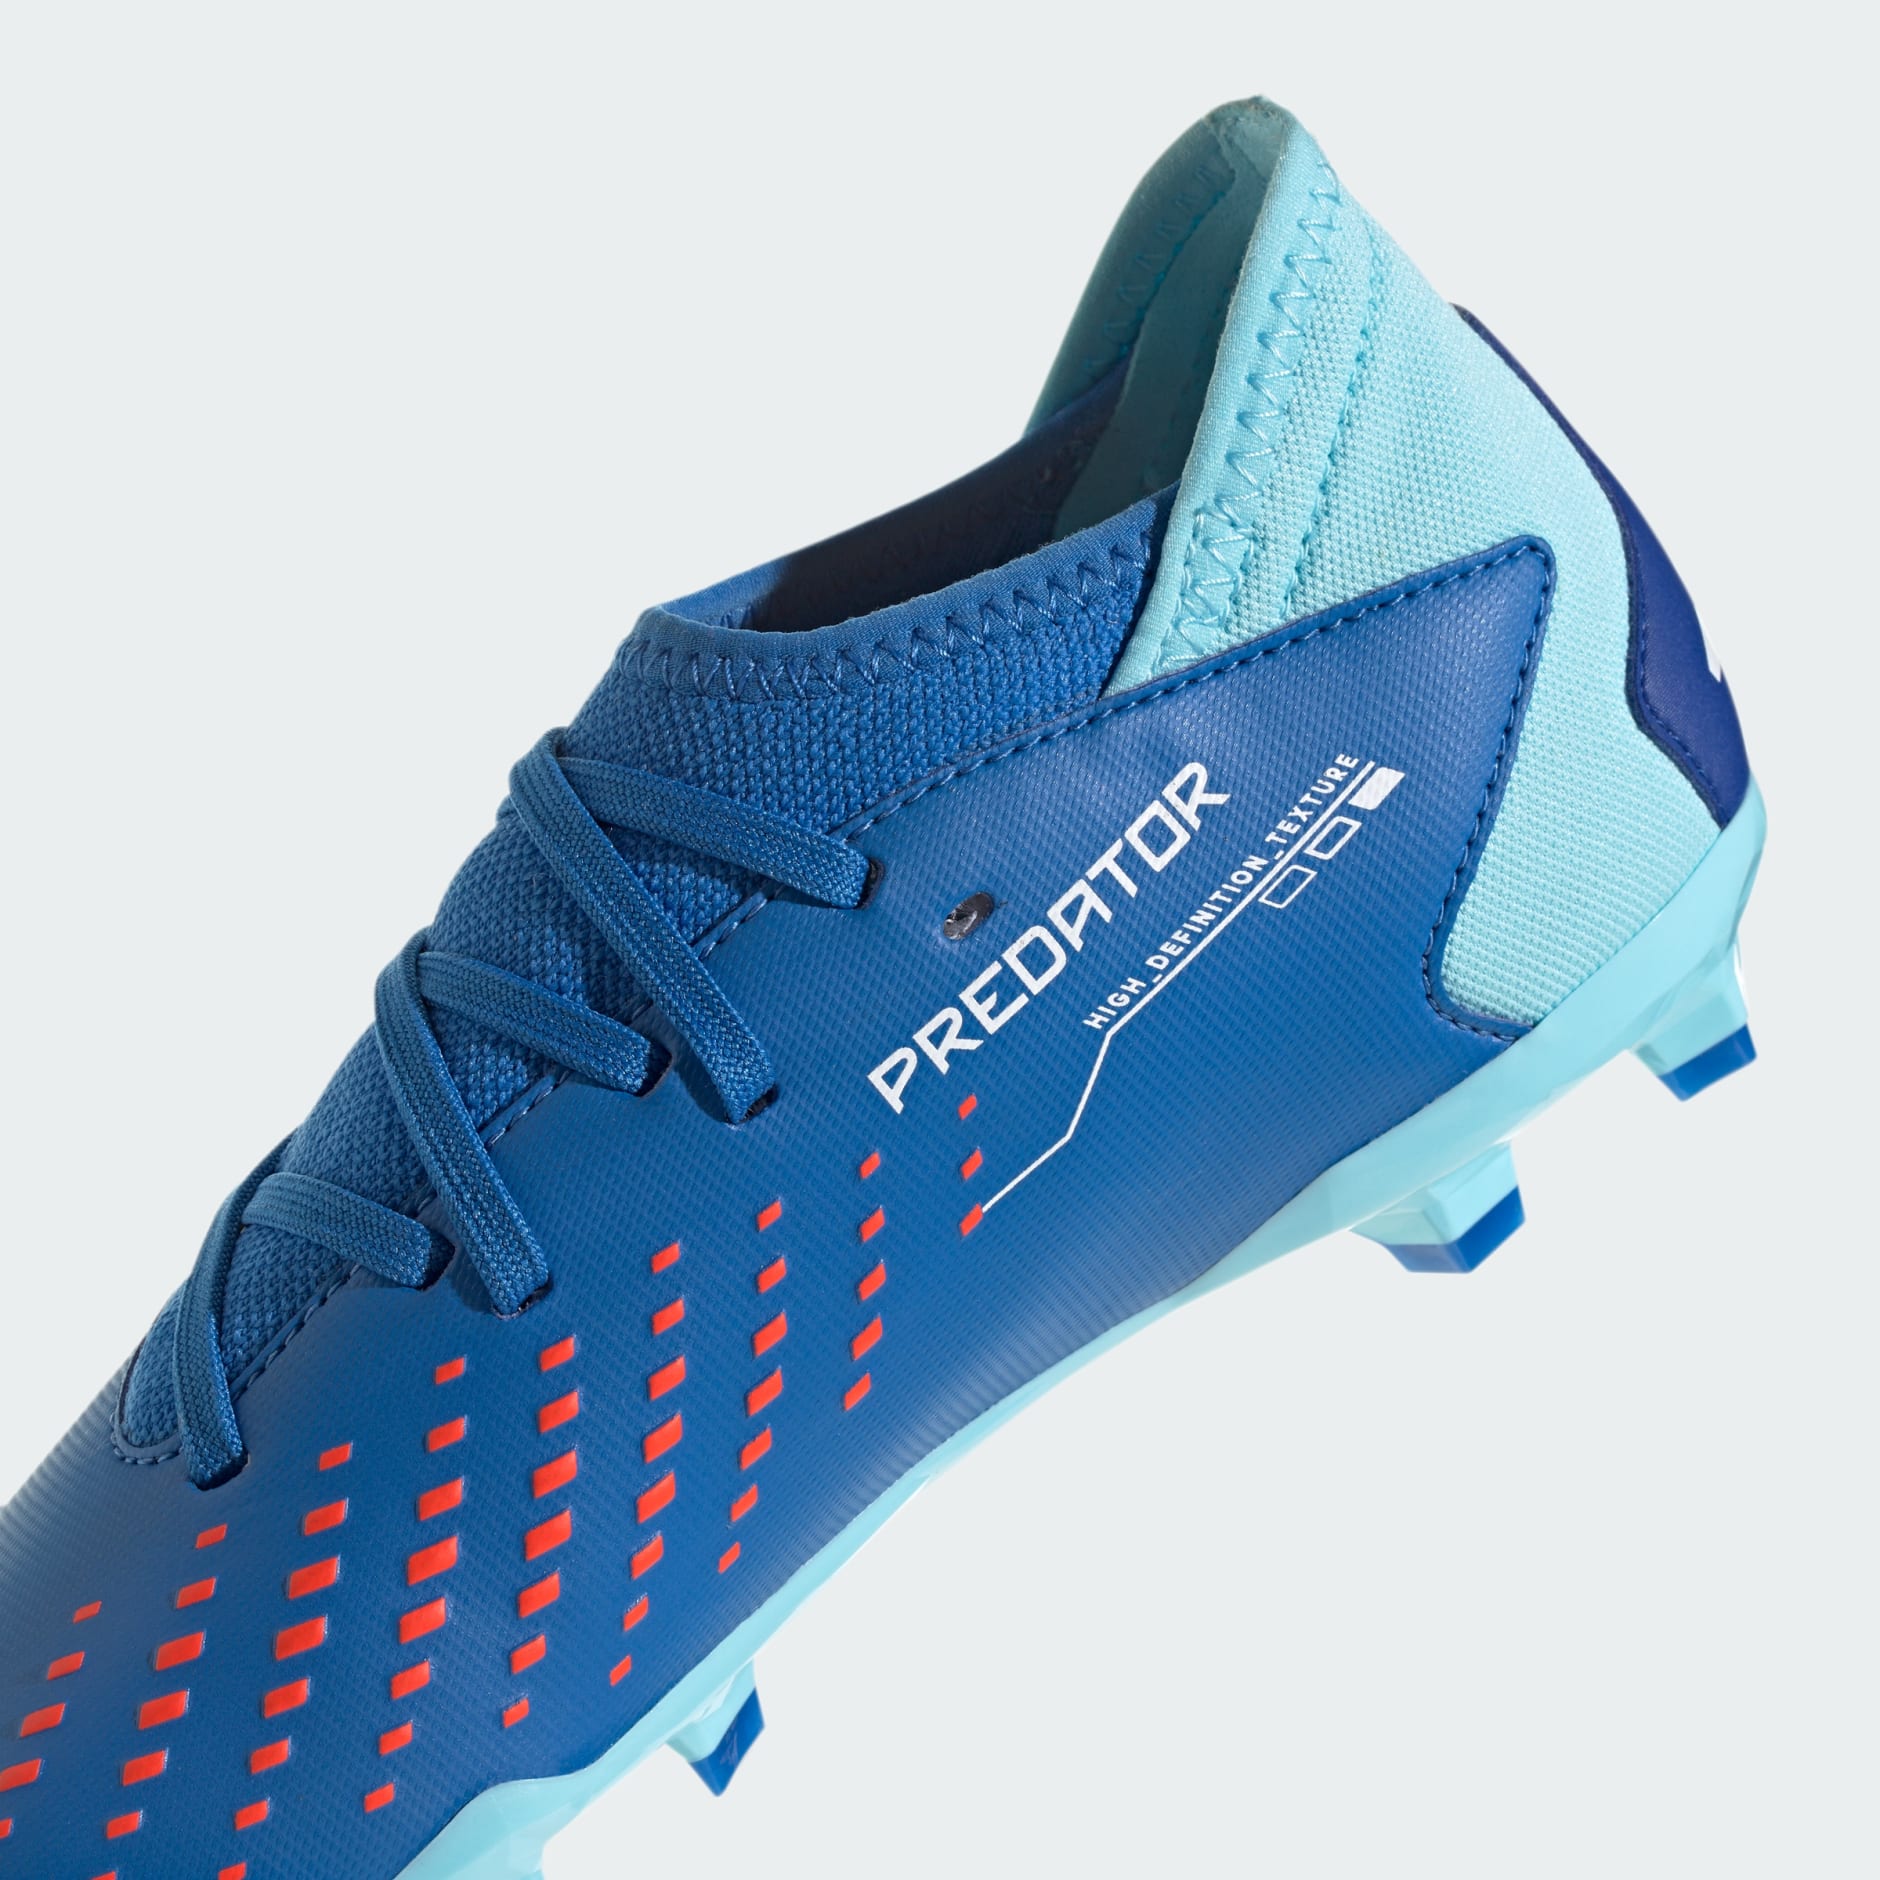 Predator adidas - Ground Accuracy.3 Blue Shoes Boots Oman - Kids Firm |